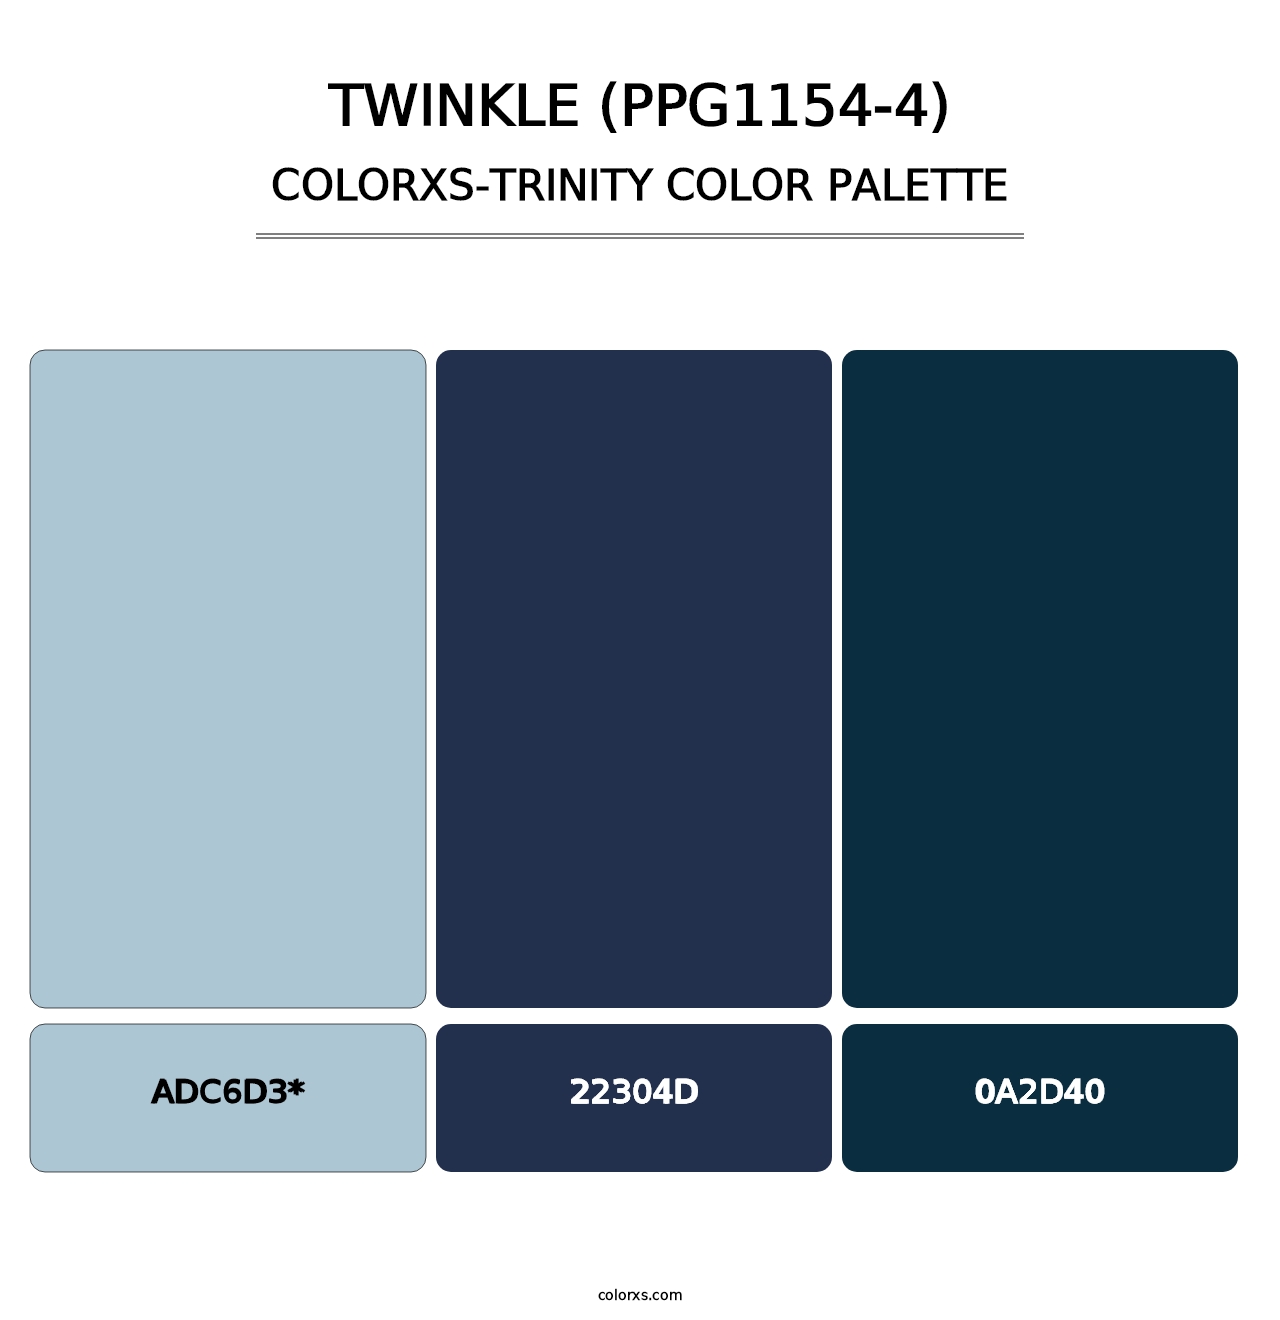 Twinkle (PPG1154-4) - Colorxs Trinity Palette